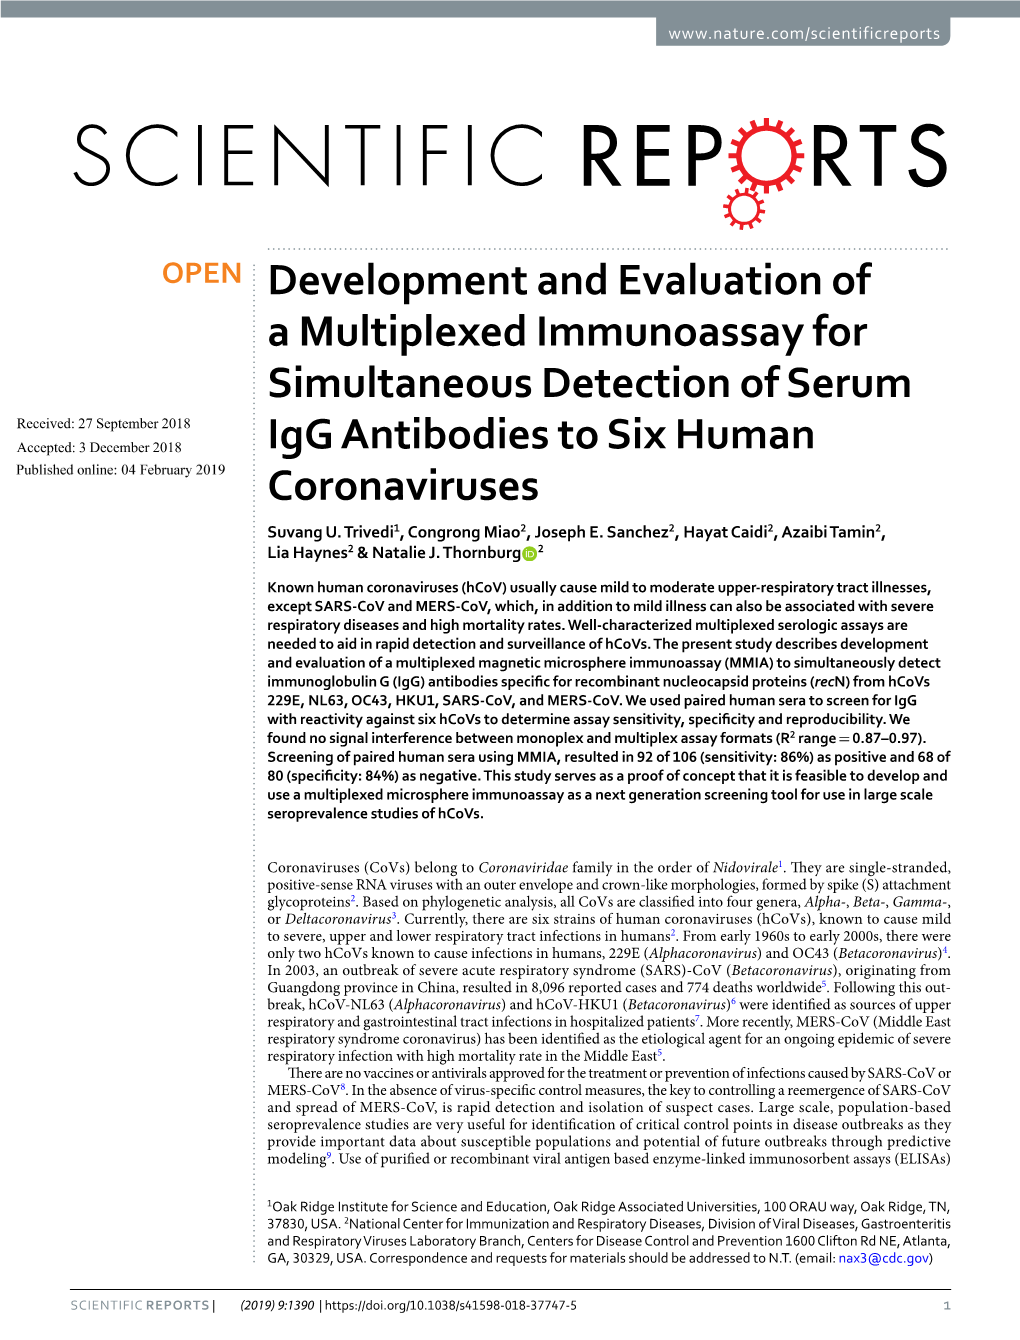 Development and Evaluation of a Multiplexed Immunoassay For